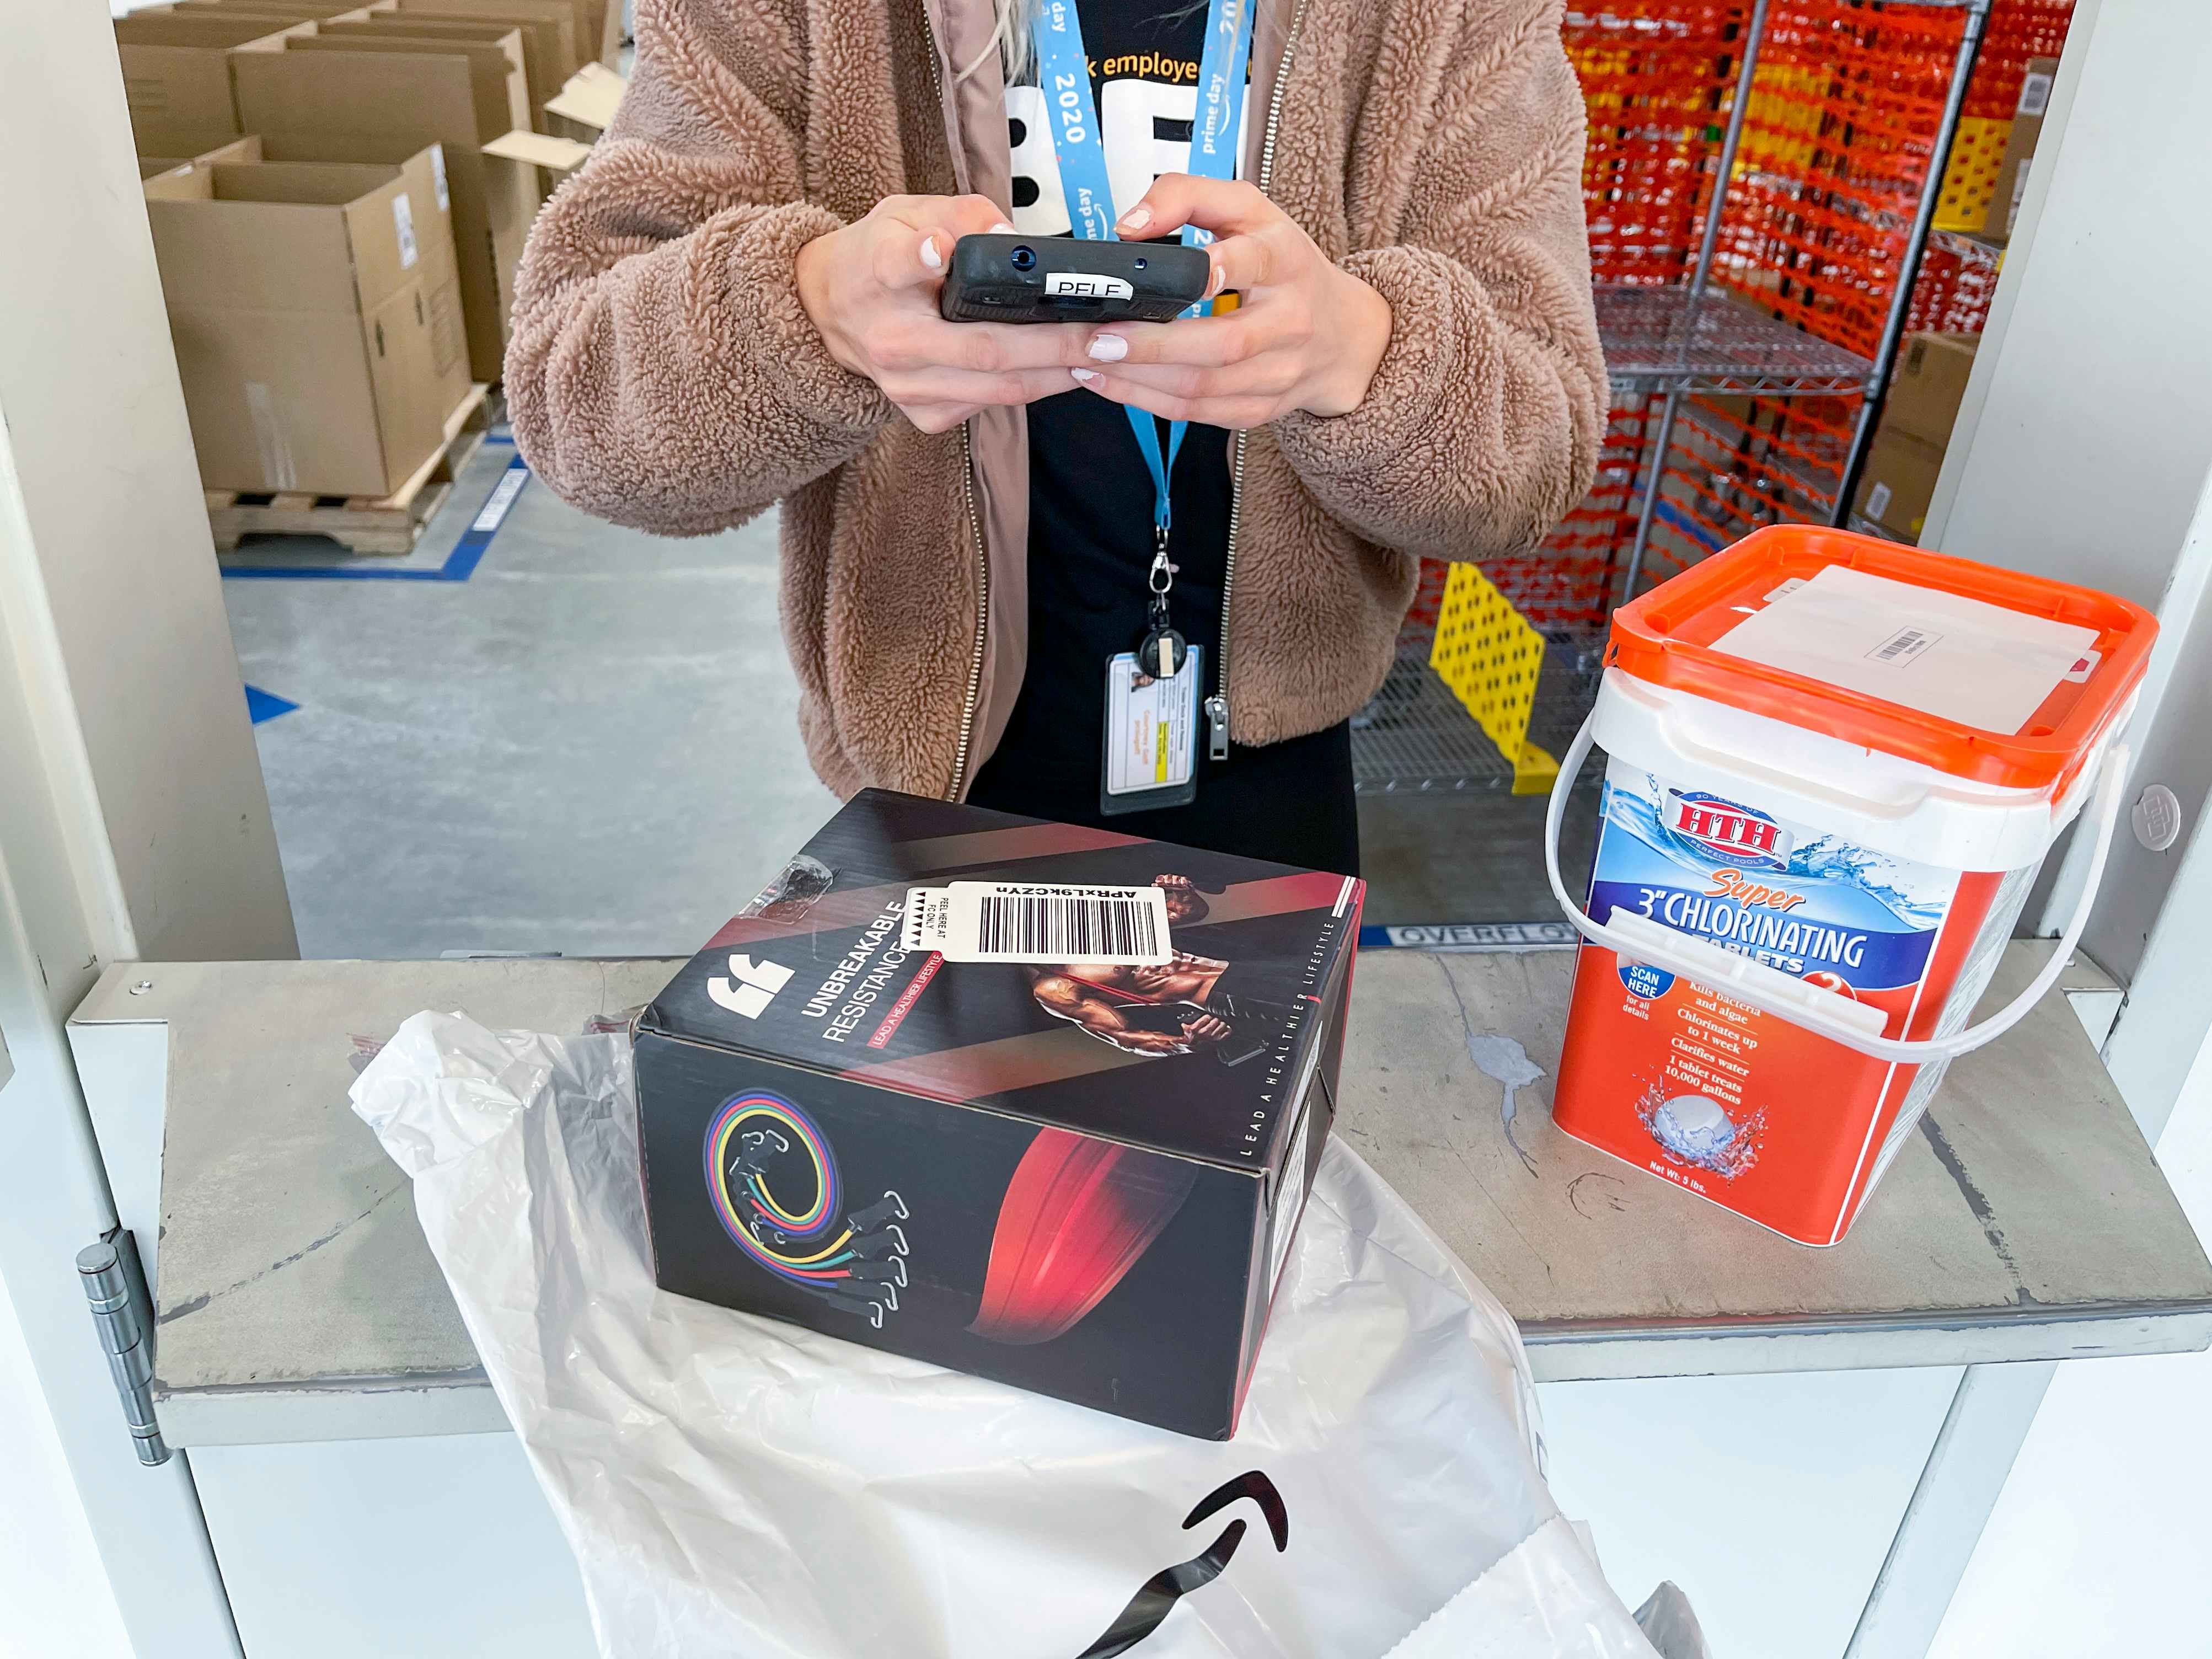 An Amazon employee scanning a return sticker on a product at an Amazon hub location